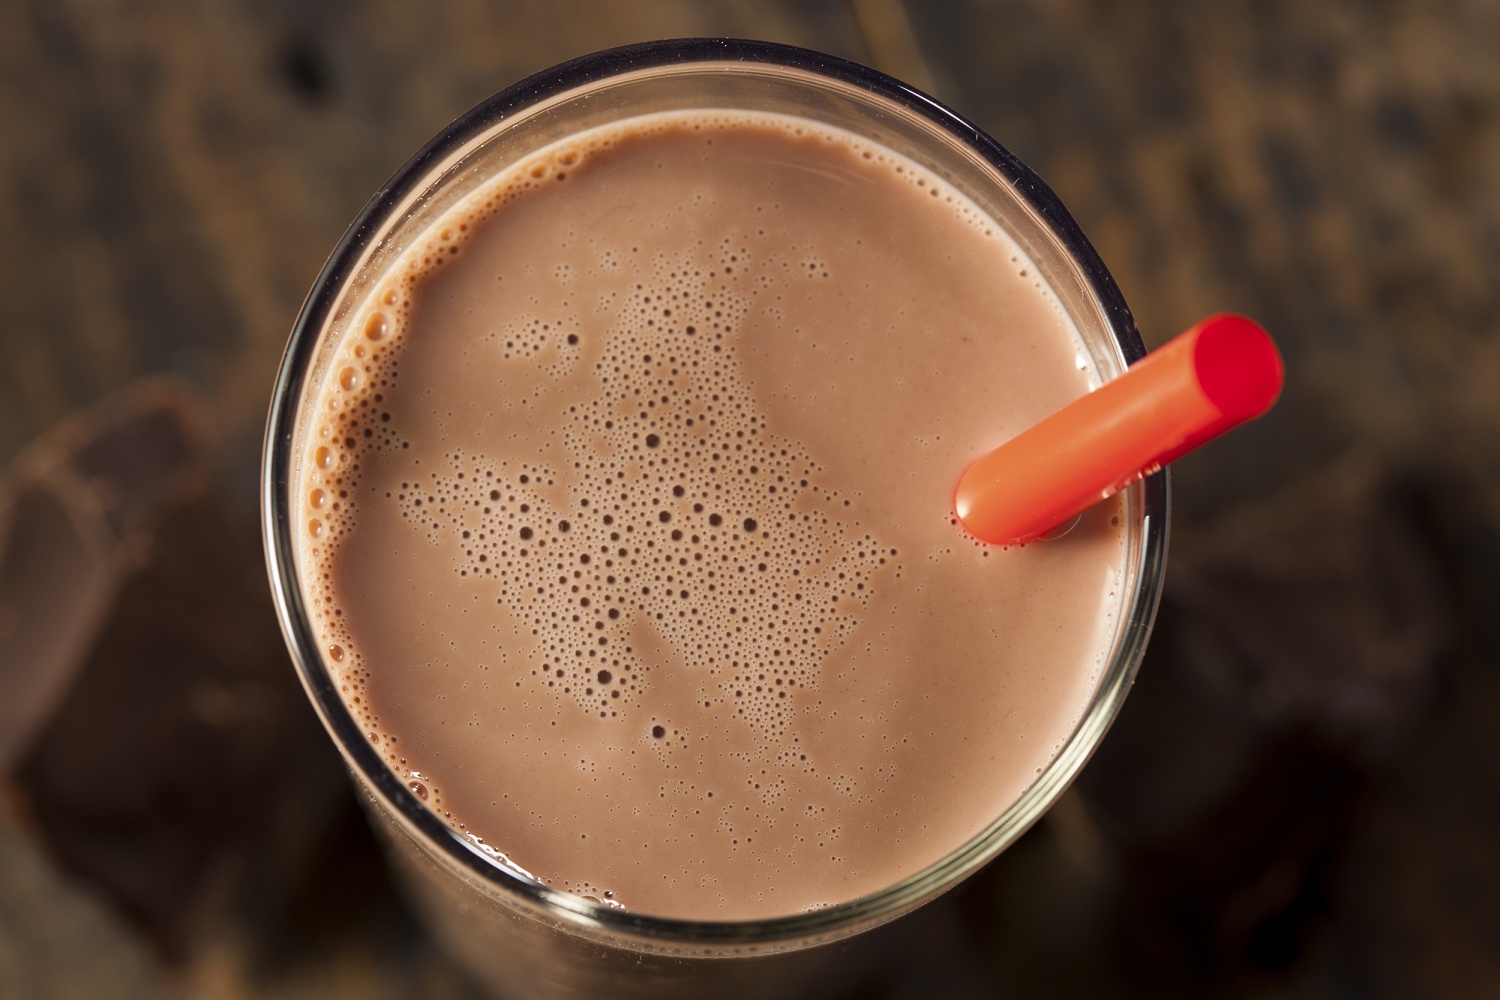 Republicans Propose Forcing Schools to Provide Chocolate Milk to Children